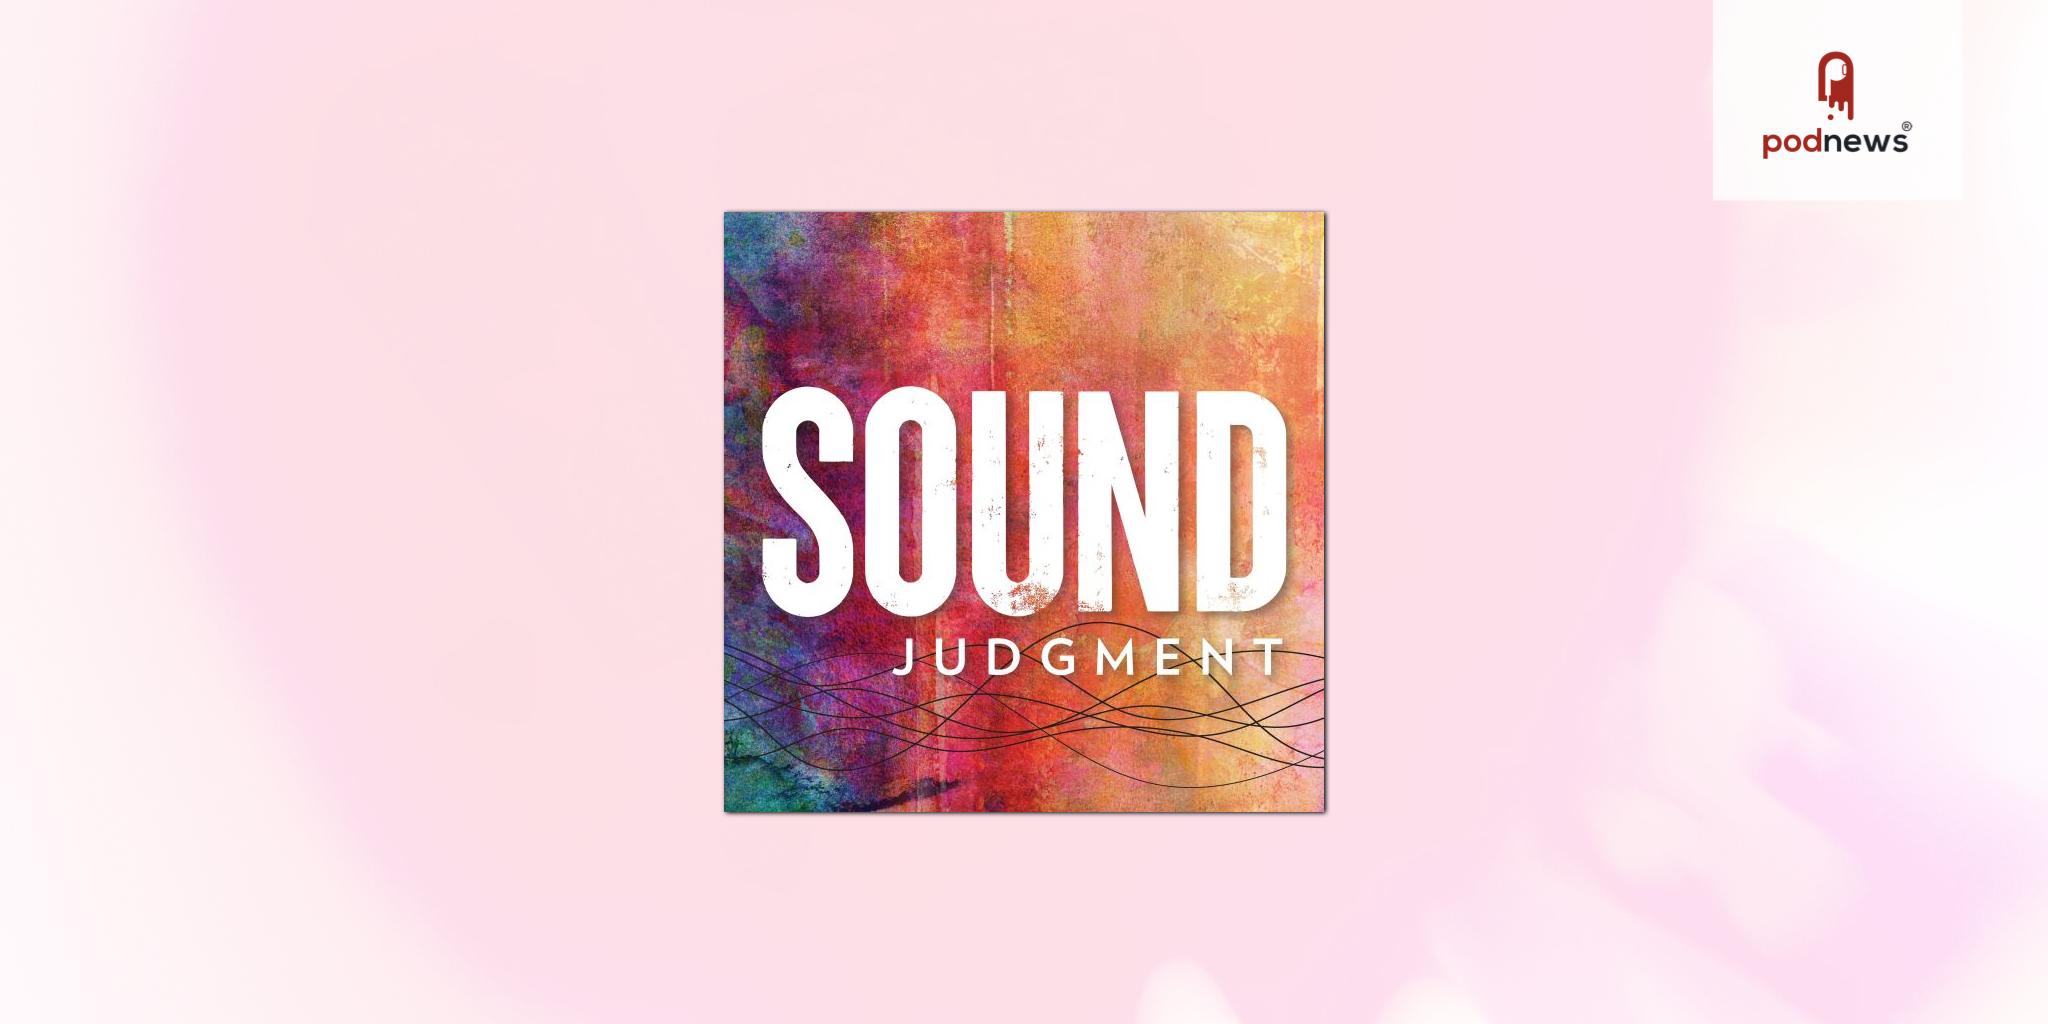 Bone Valley Co-Hosts Gilbert King and Kelsey Decker Go Behind the Scenes on Sound Judgment